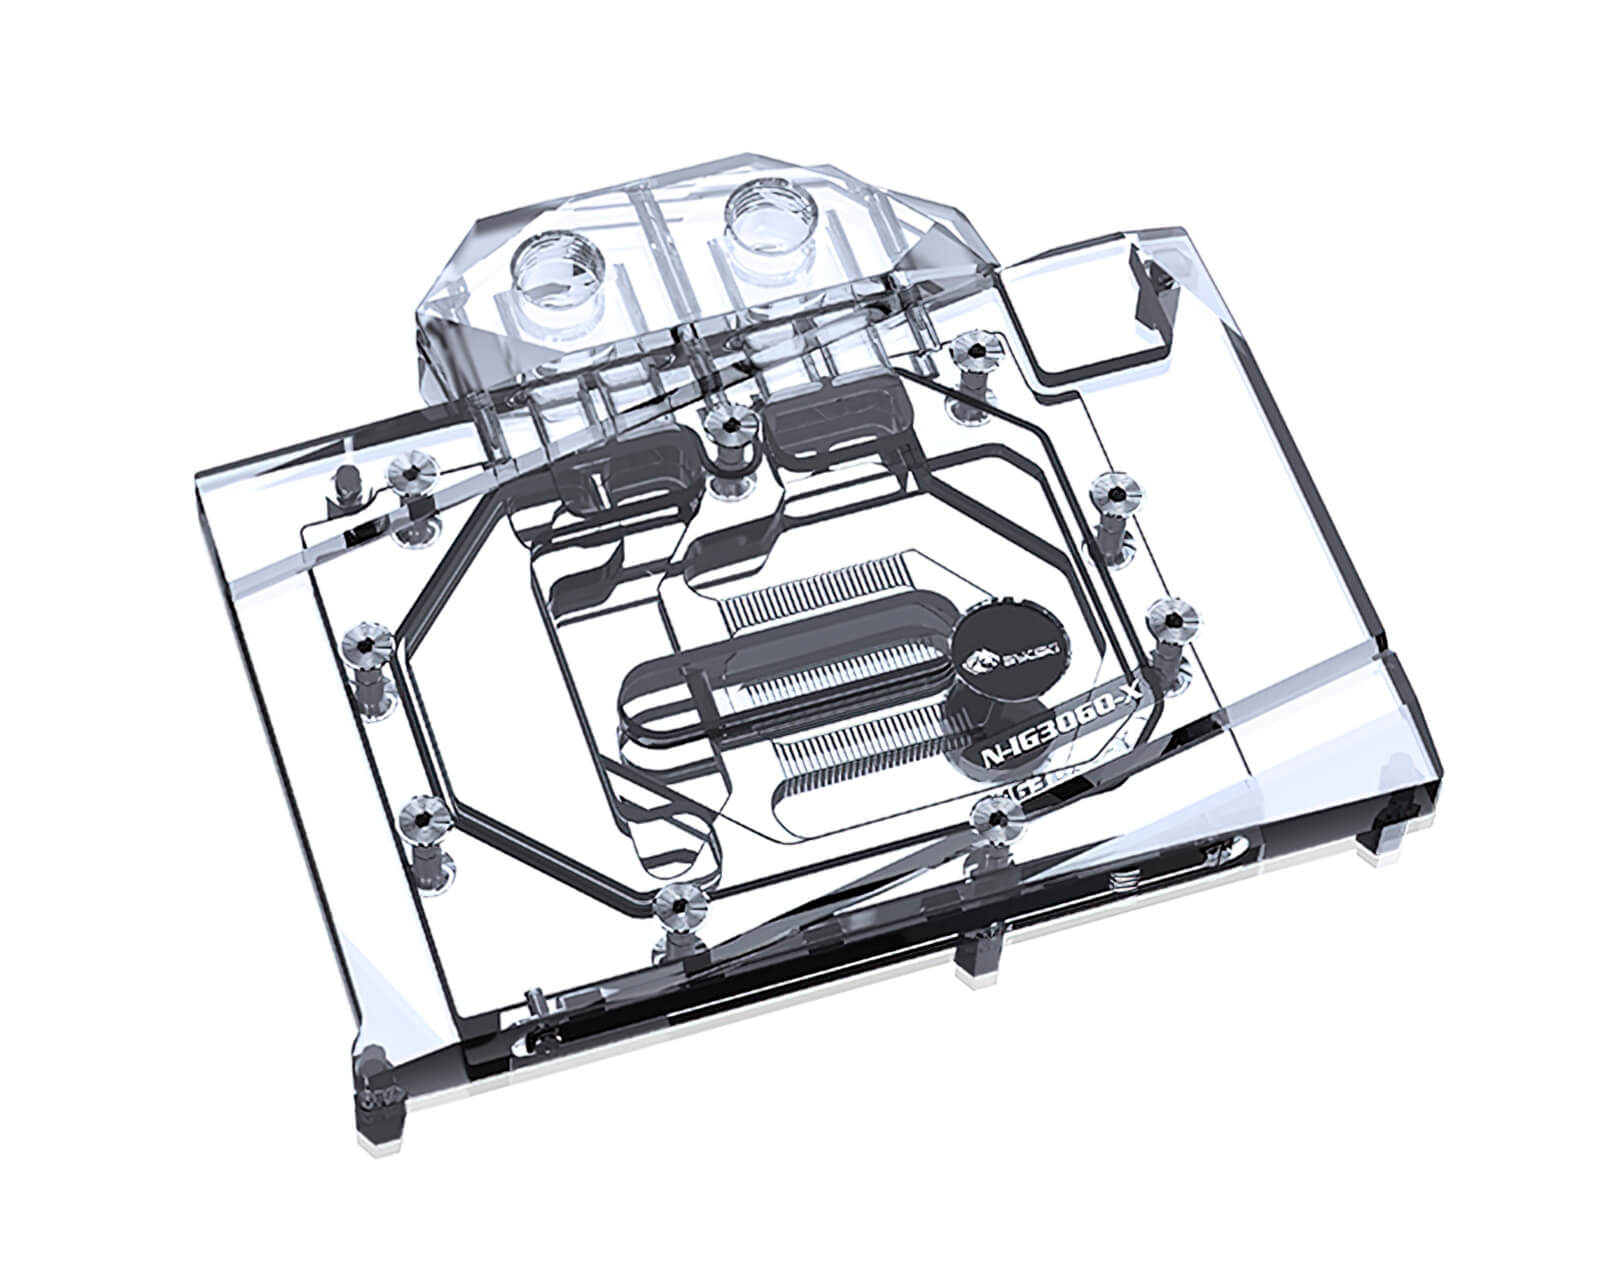 Bykski Full Coverage GPU Water Block and Backplate for iGame RTX 3060 bilibili E-sports Edition 12G (N-IG3060-X) - PrimoChill - KEEPING IT COOL